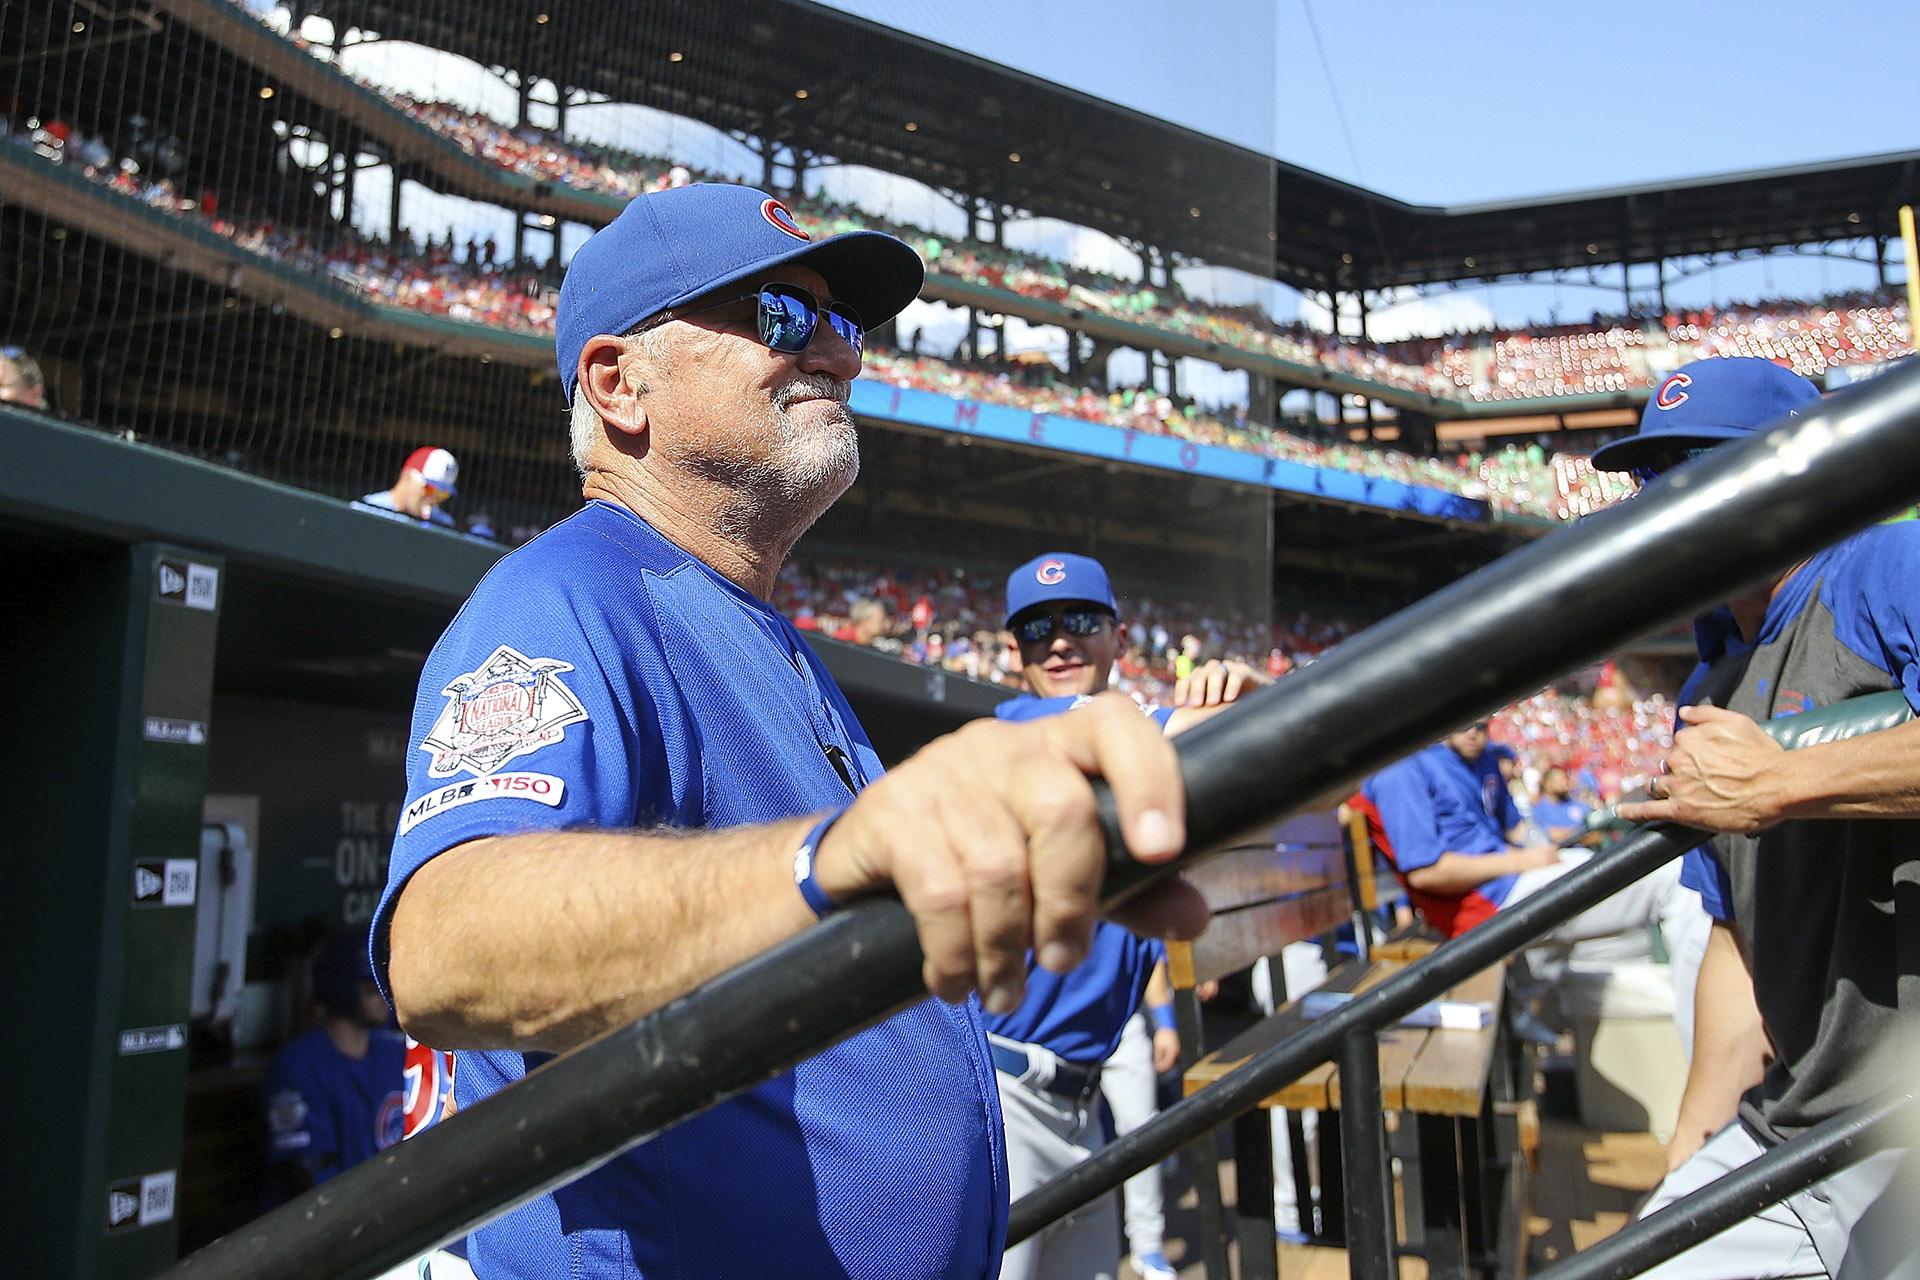 Chicago Cubs manager Joe Maddon looks out from the dugout prior to a baseball game against the St. Louis Cardinals, Sunday, Sept. 29, 2019, in St. Louis. (AP Photo / Scott Kane)